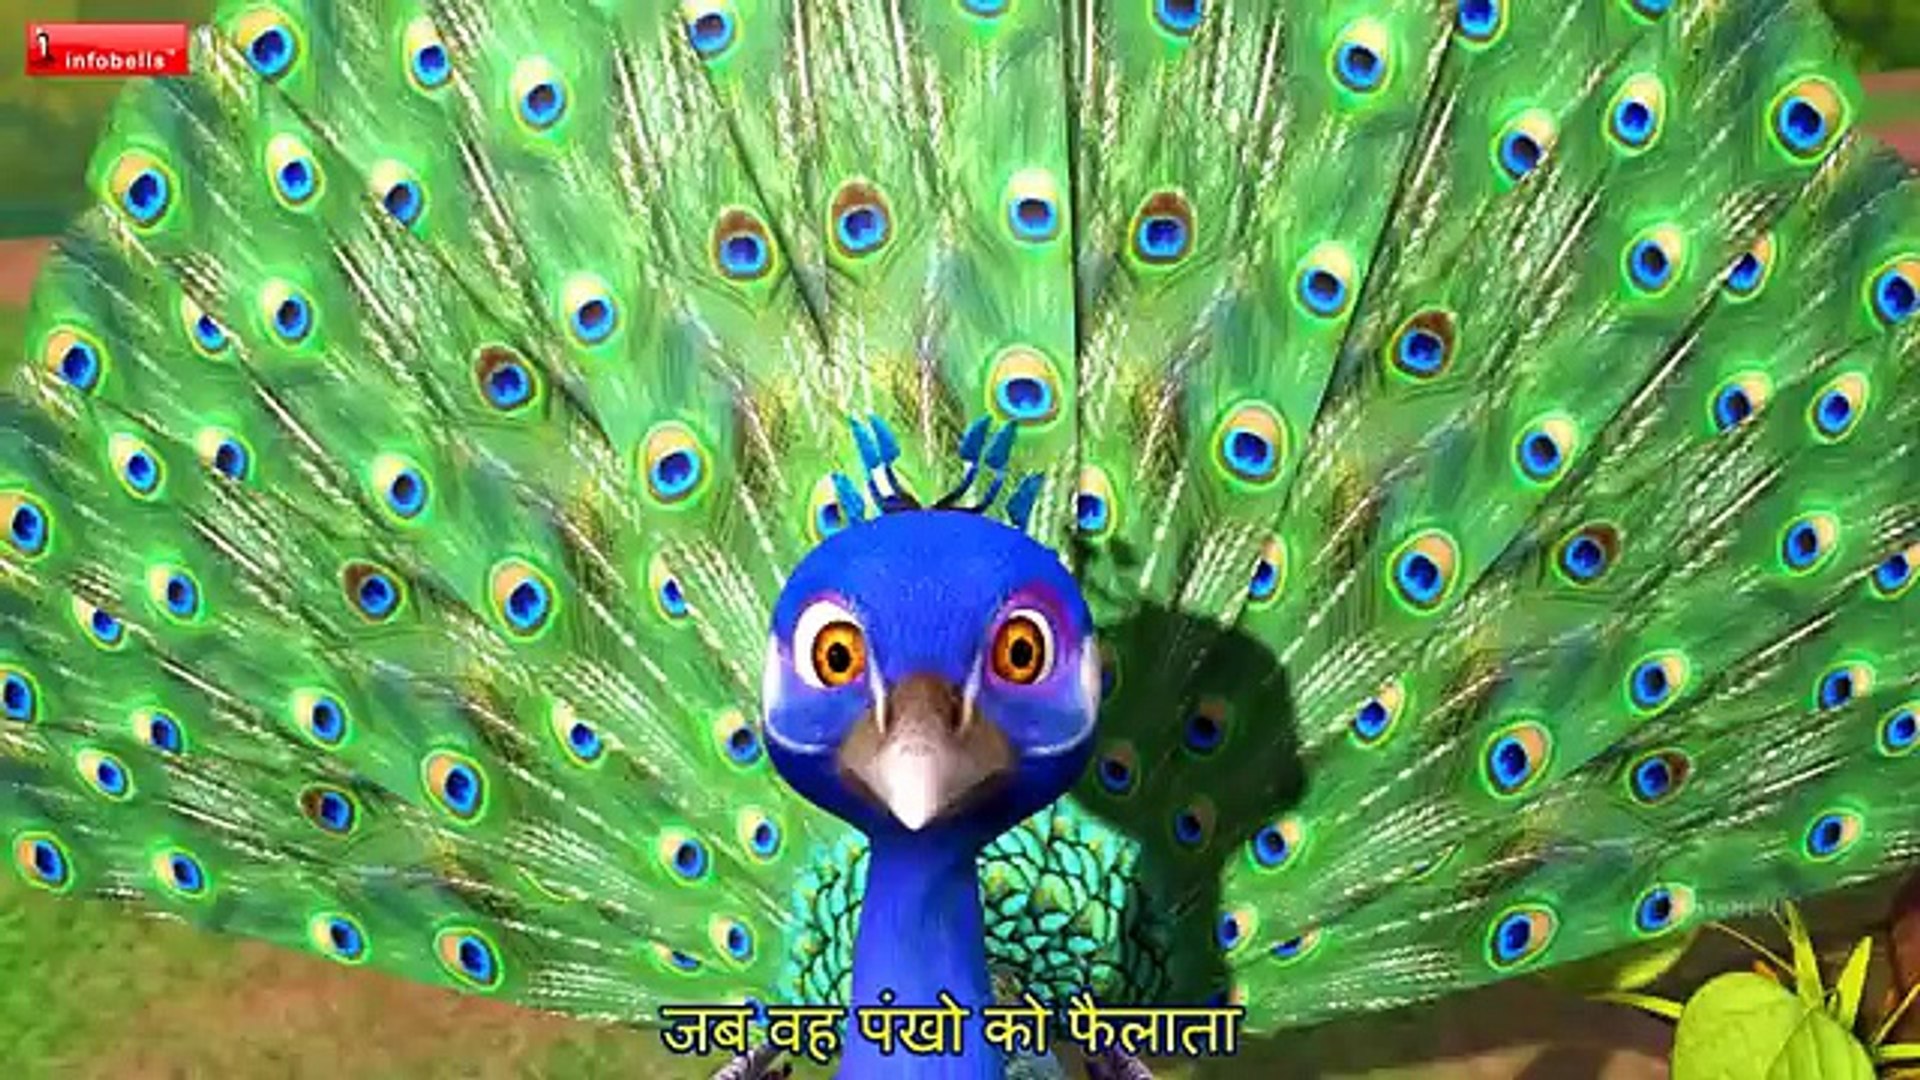 नाच मोर । Peacock Hindi Rhymes for Children - Hindi Urdu Famous Nursery  Rhymes for kids-Ten best Nursery Rhymes-English Phonic Songs-ABC Songs For  children-Animated Alphabet Poems for Kids-Baby HD cartoons-Best Learning HD